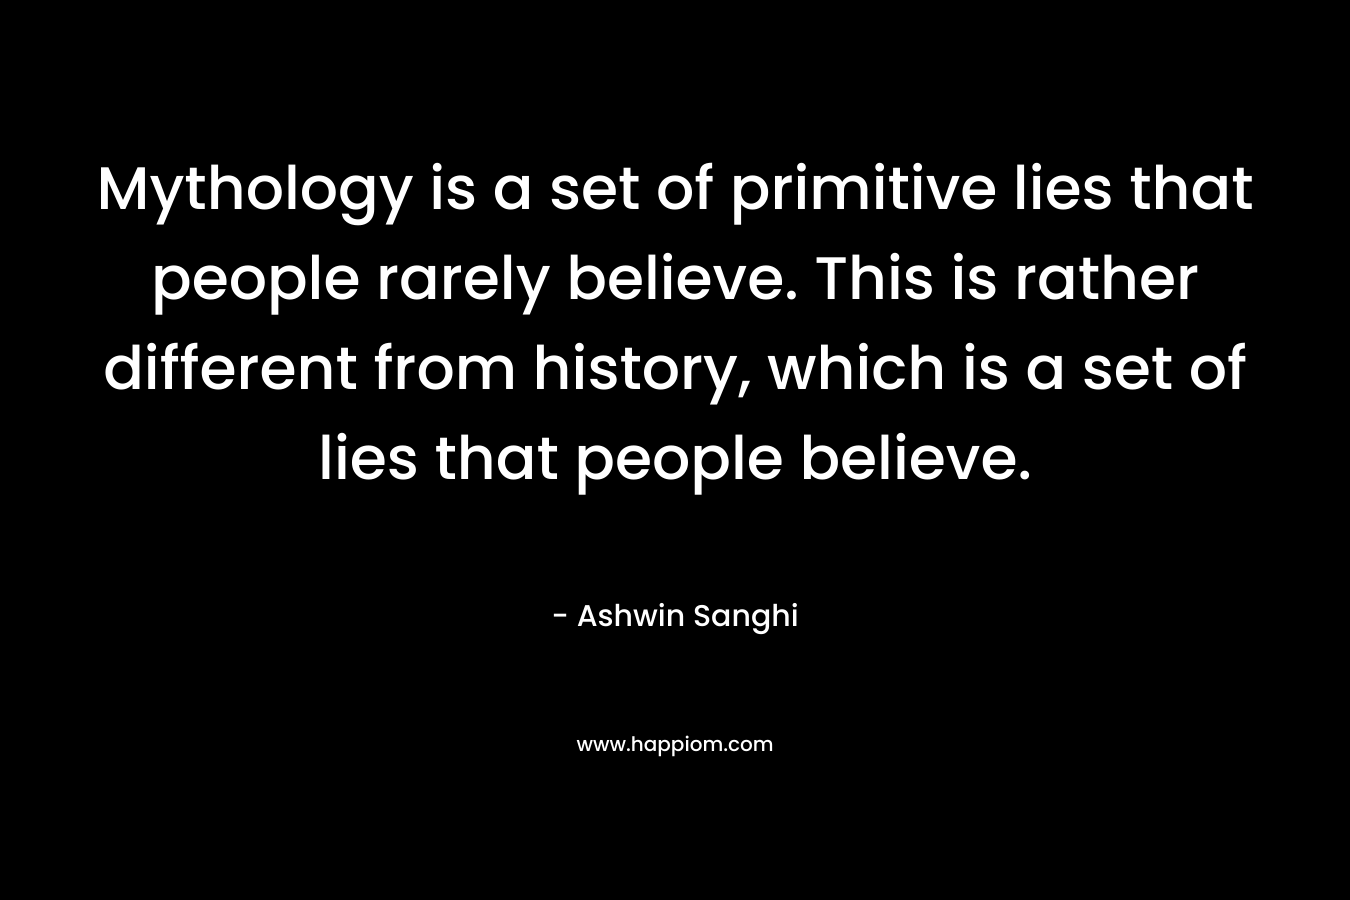 Mythology is a set of primitive lies that people rarely believe. This is rather different from history, which is a set of lies that people believe.